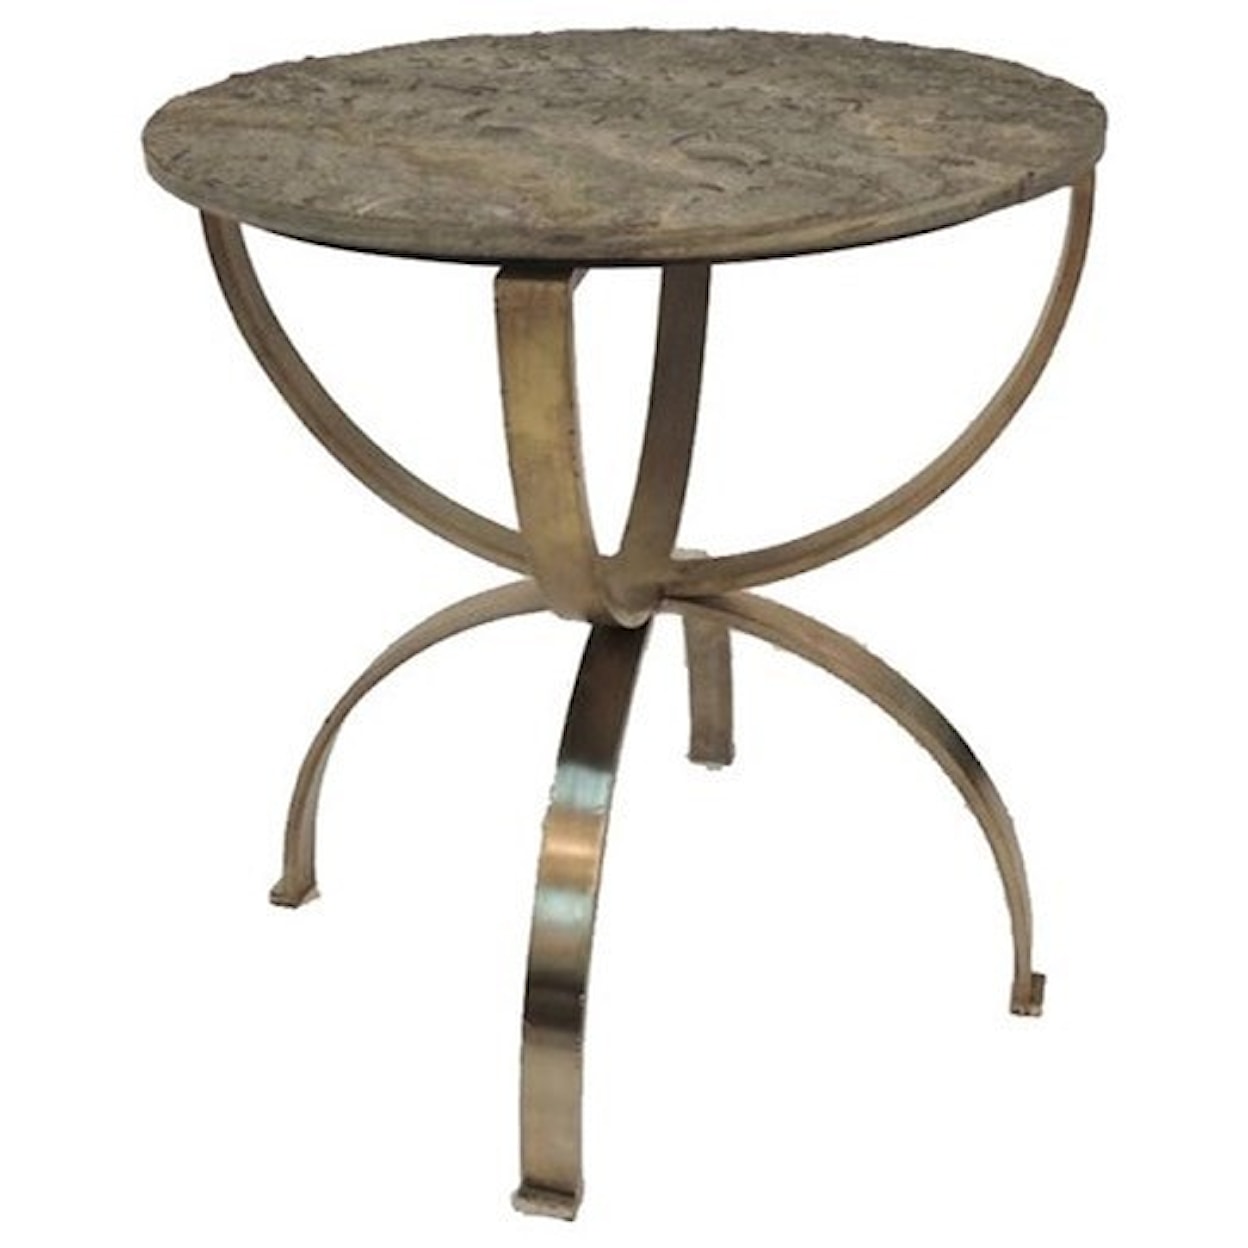 Crestview Collection Accent Furniture Bengal Manor Curved Aged Brass Round Accent